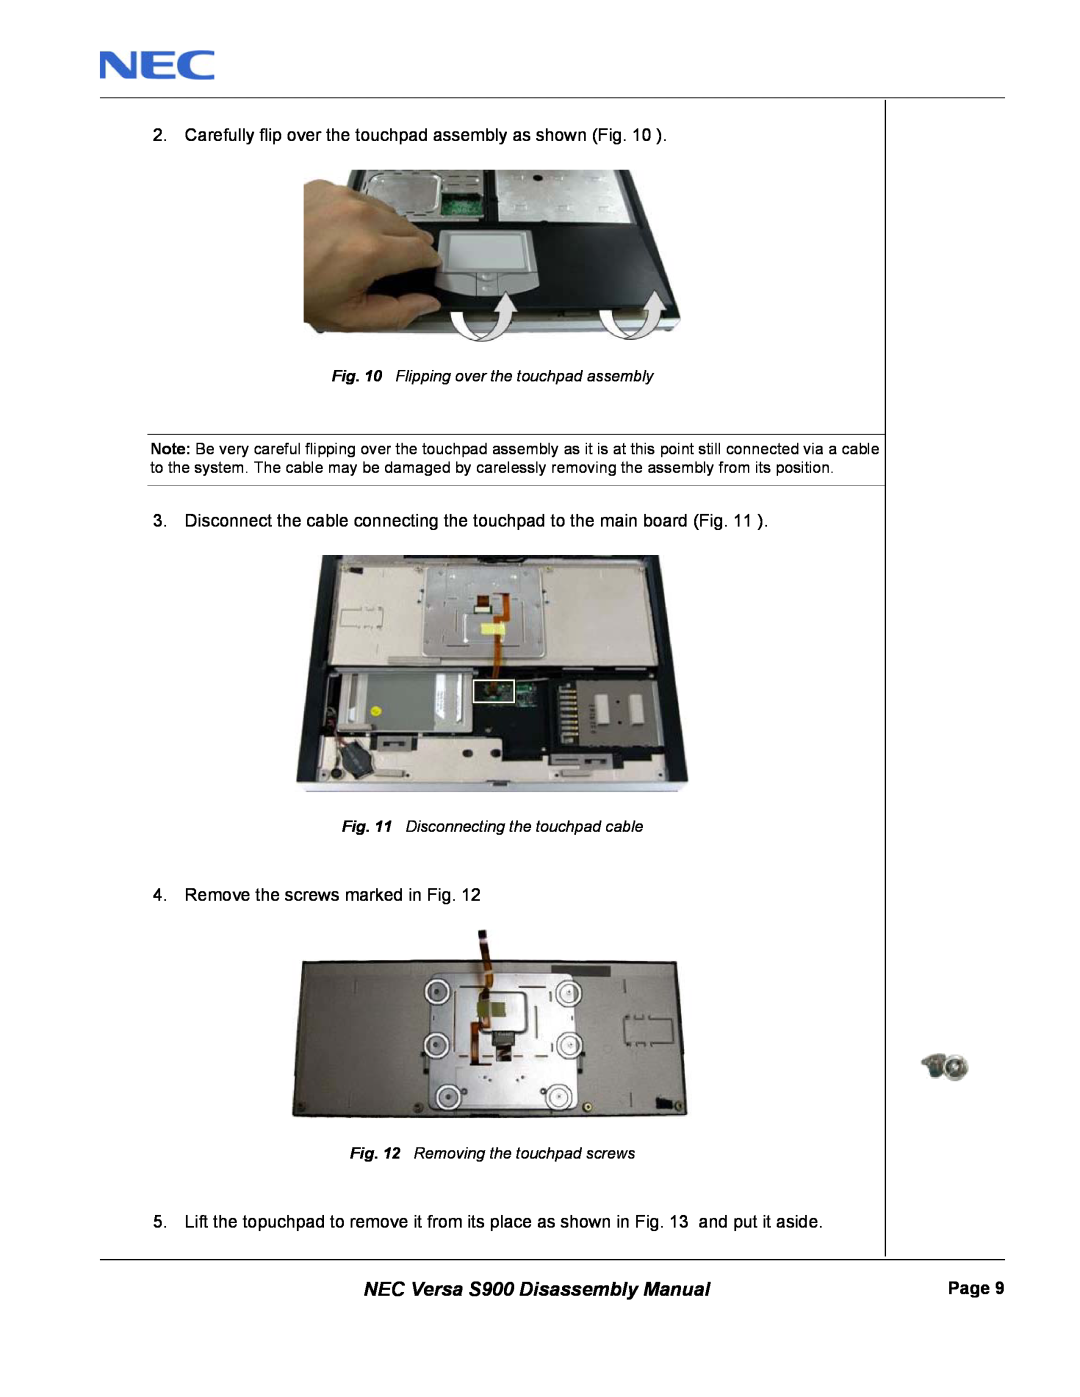 NEC manual NEC Versa S900 Disassembly Manual, Remove the screws marked in Fig 